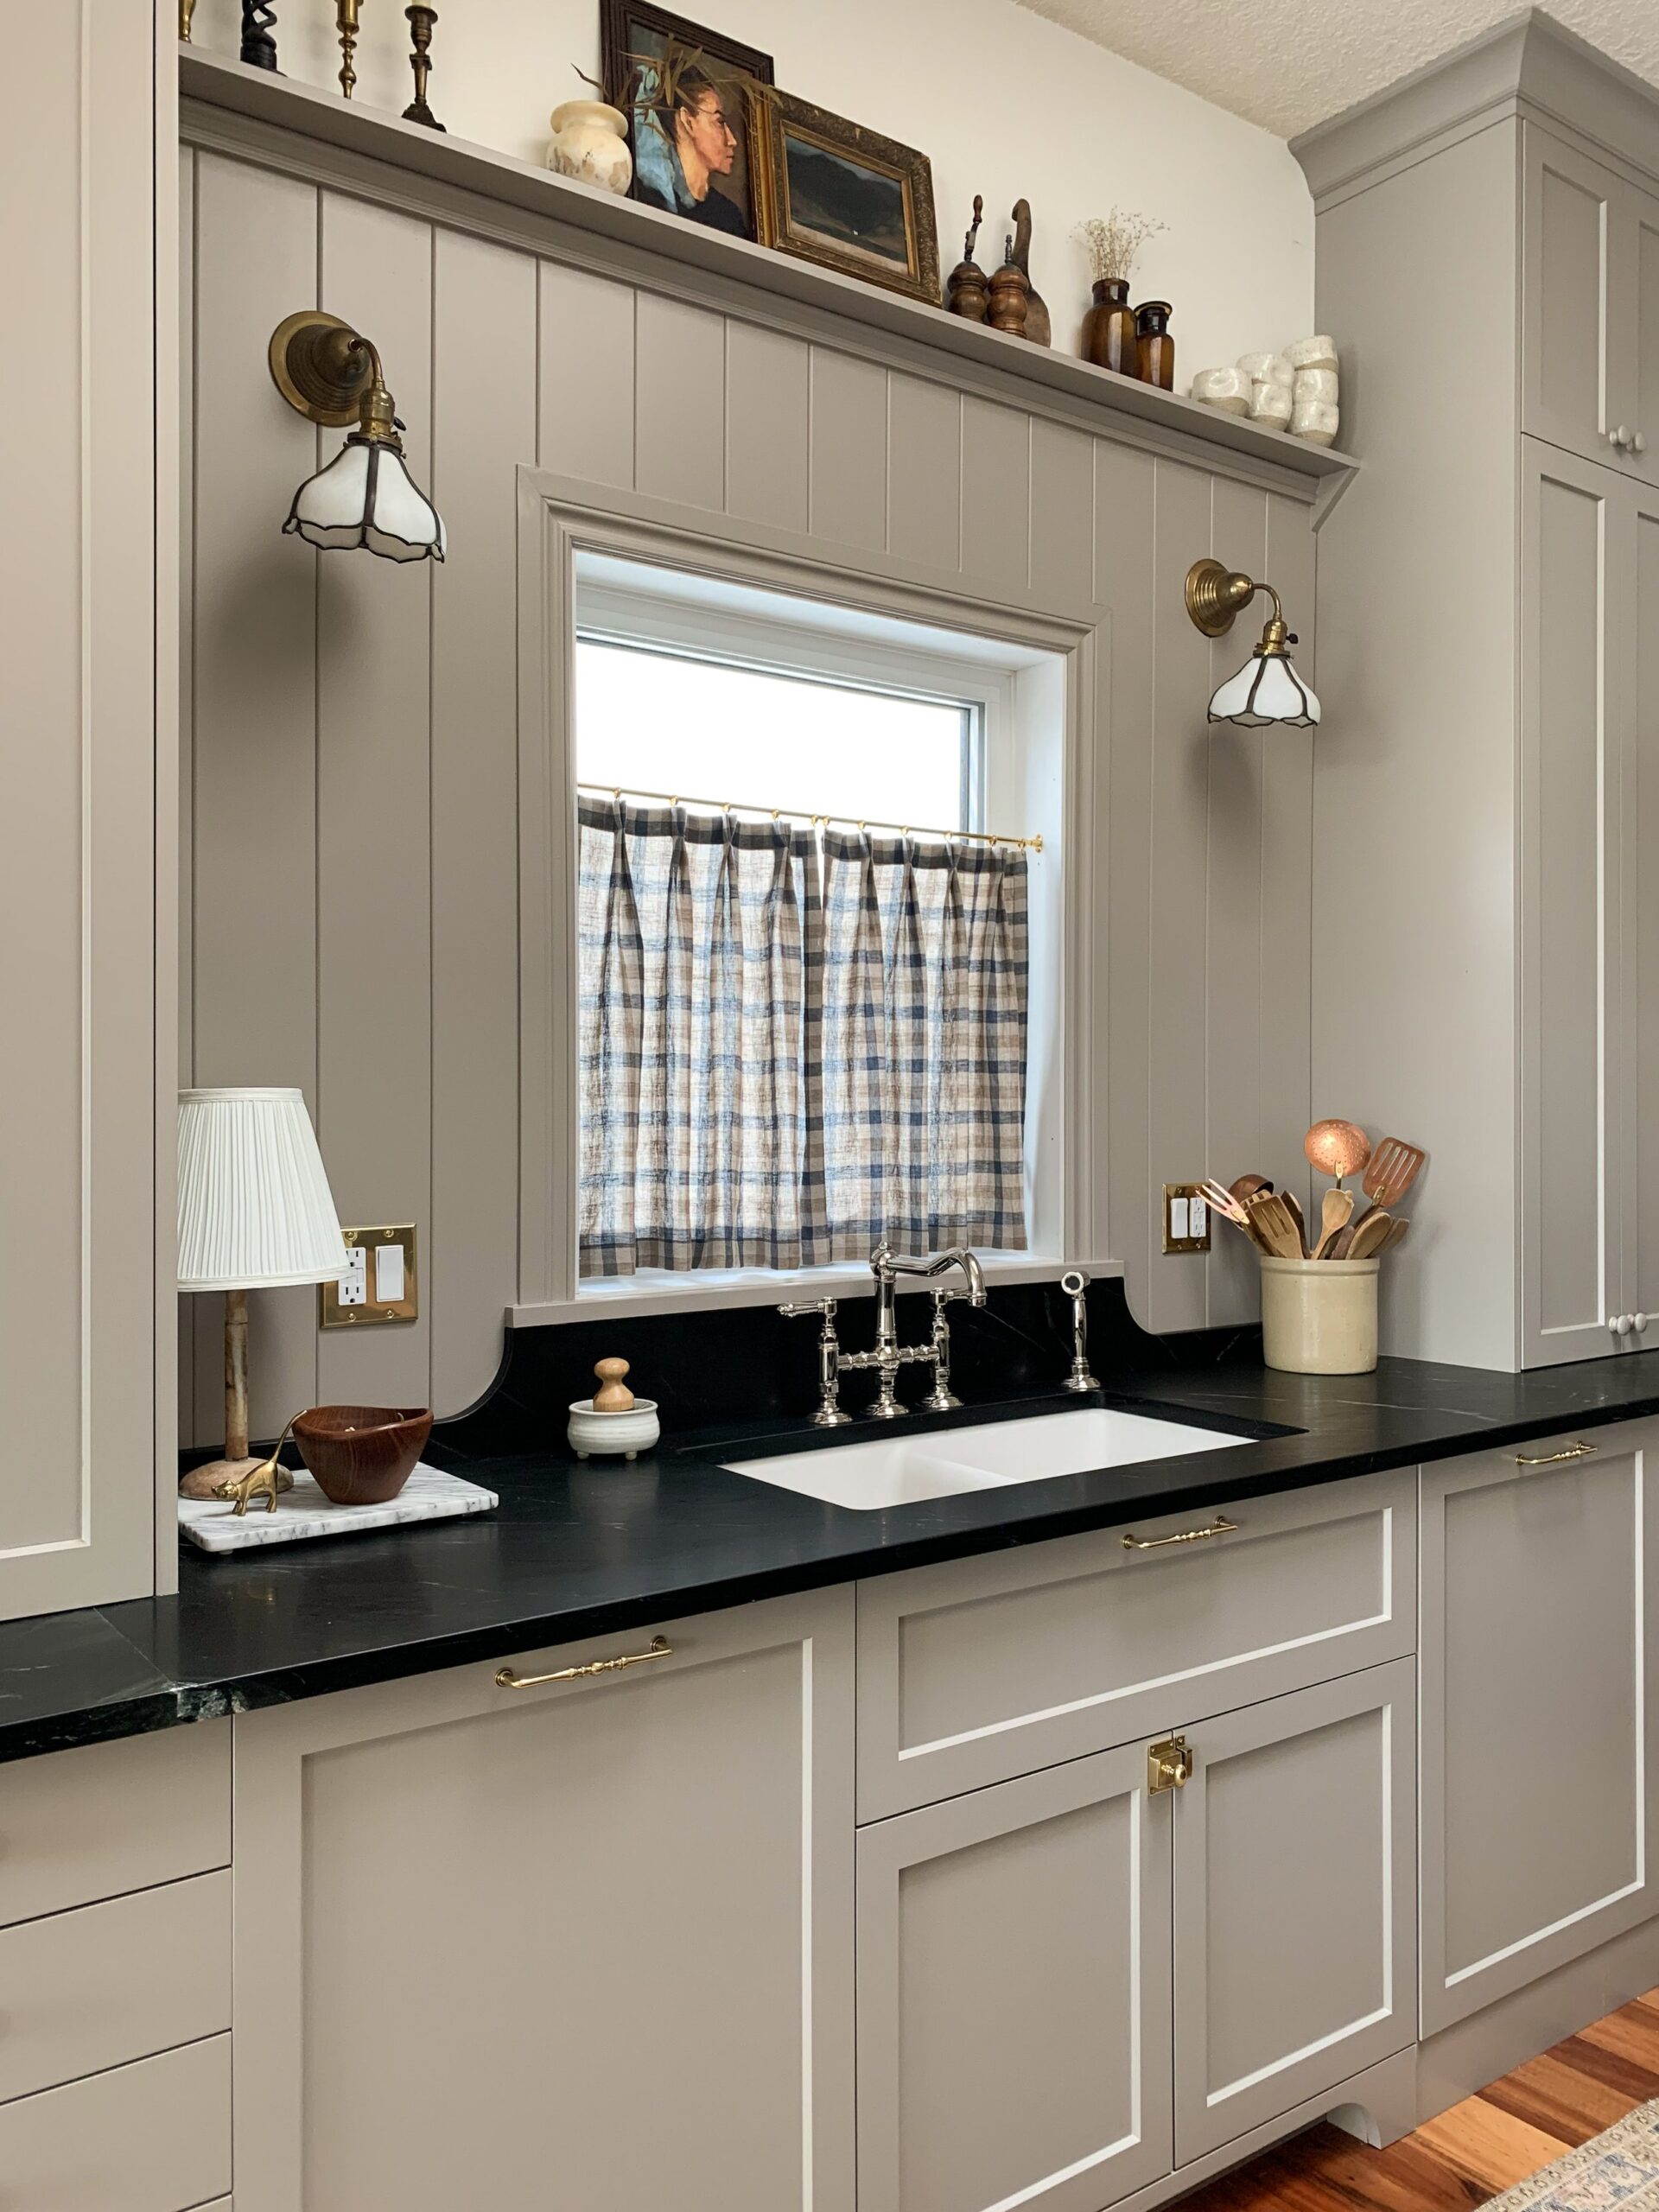 kitchen sink area with countertop cabinets flanking the sink, soapstone counters with curved stone backsplash up to a window, paneled wall with shelf and vintage pendants, cafe curtain on window